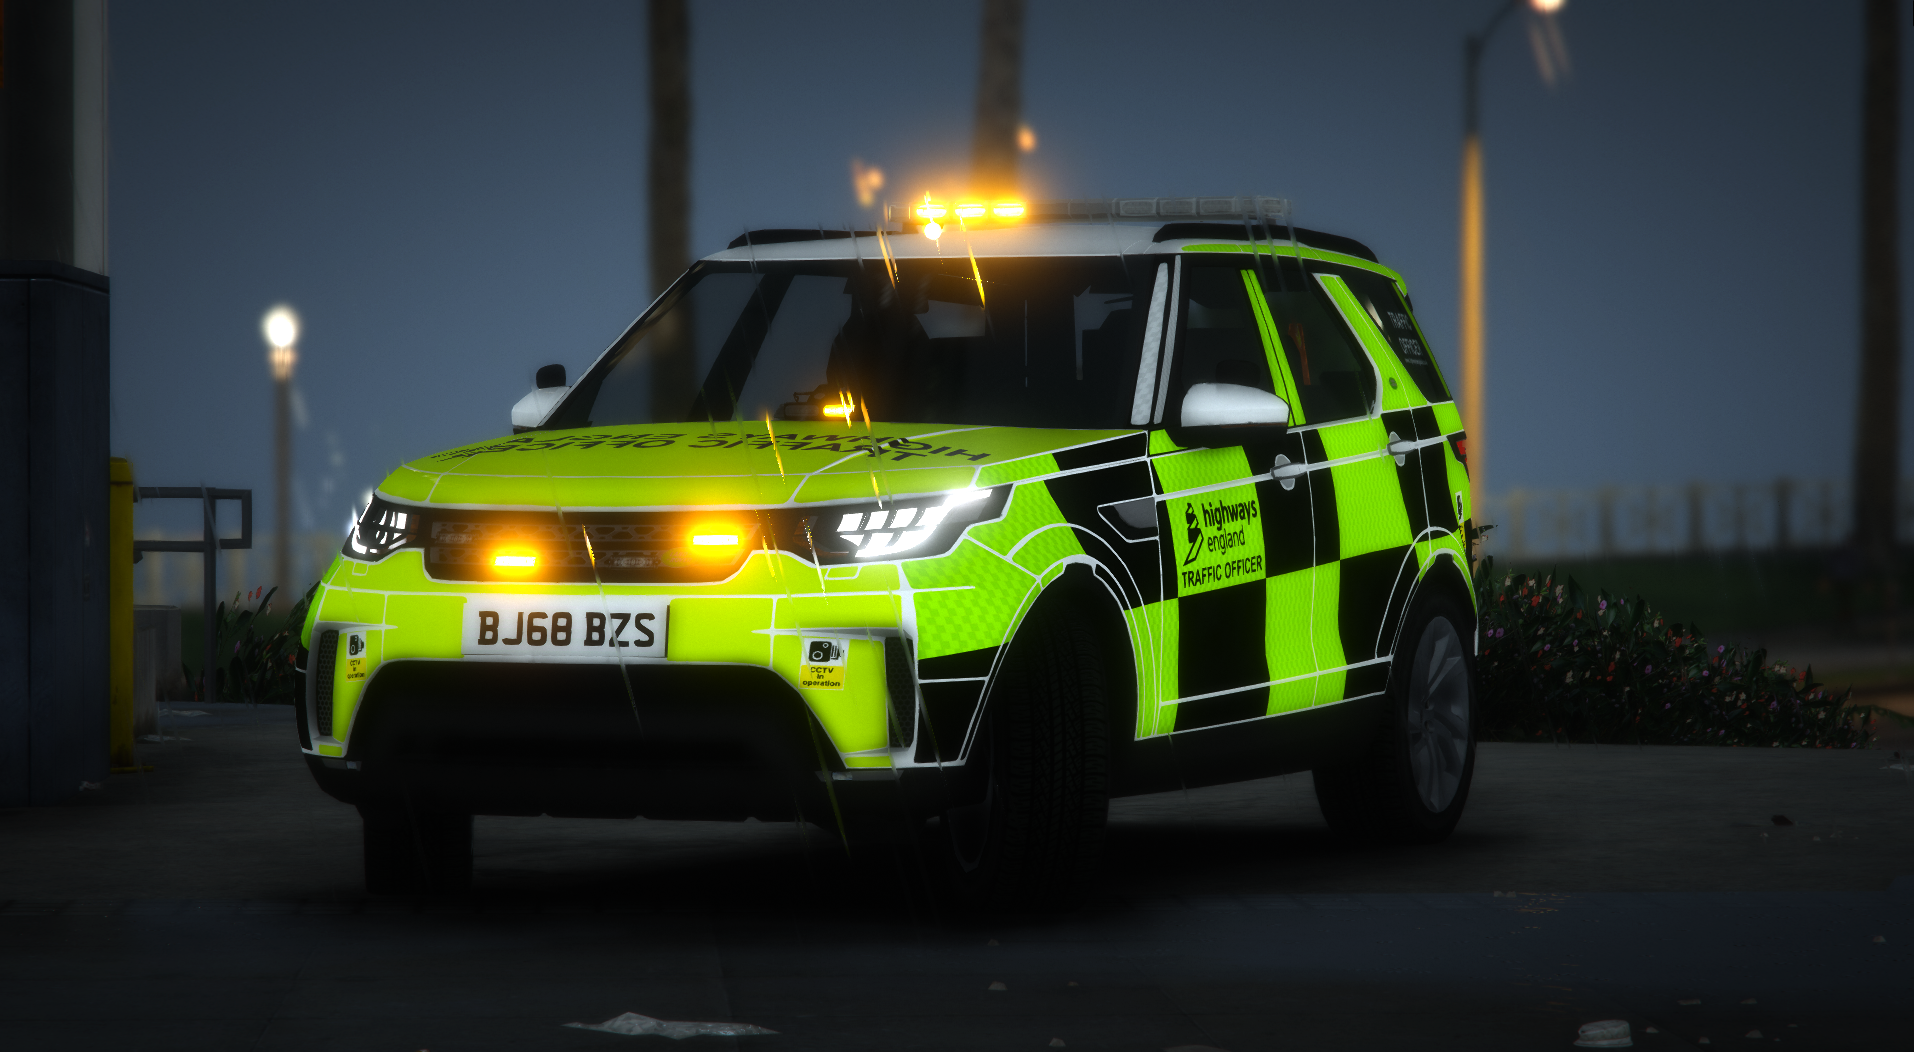 2022 Highways England Land Rover Discovery 5 ELS GTA5 